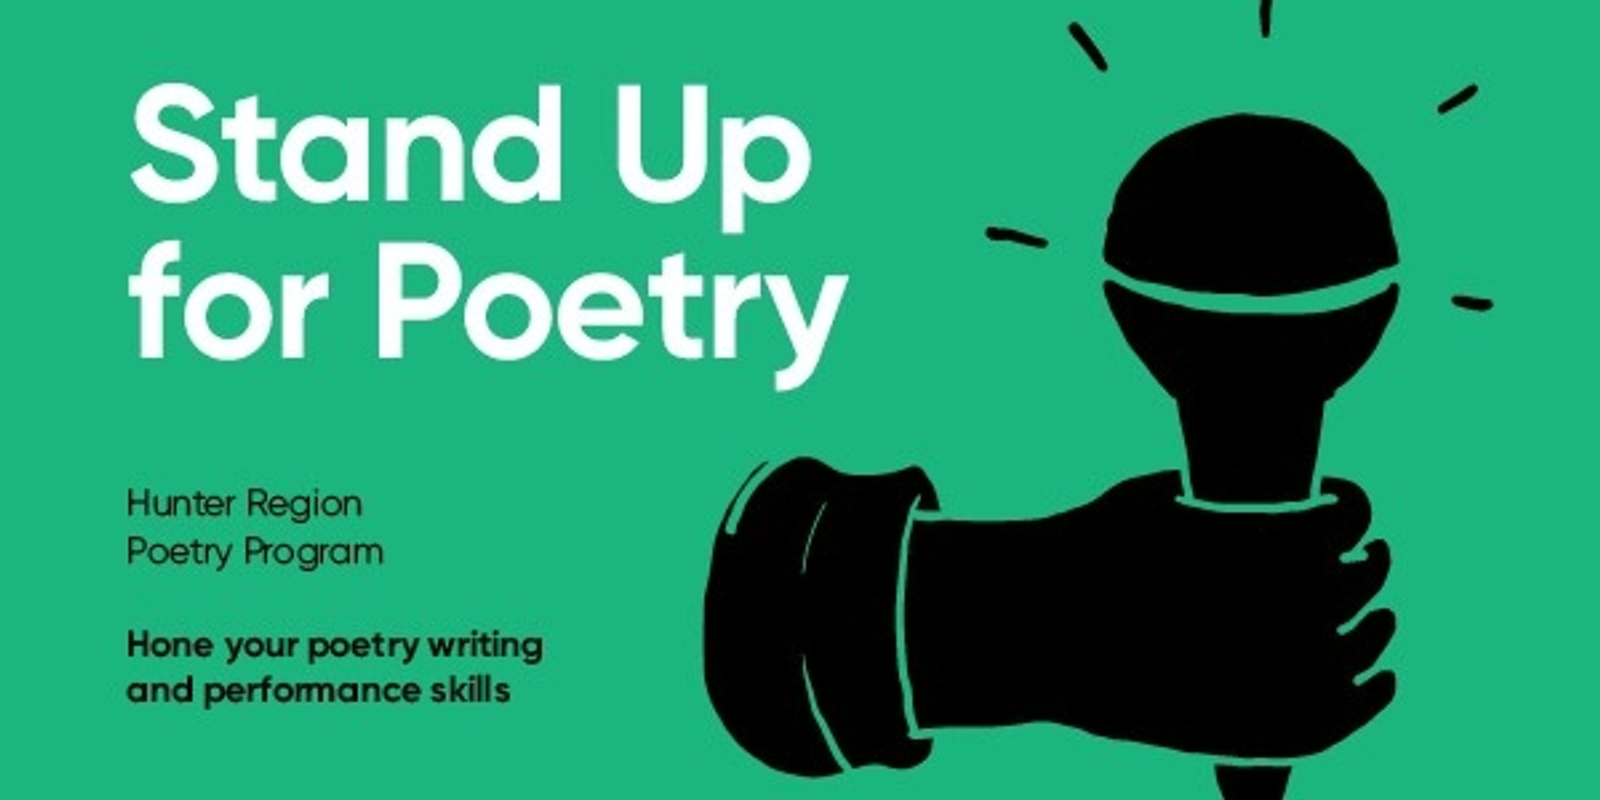 Stand up for Poetry 2021